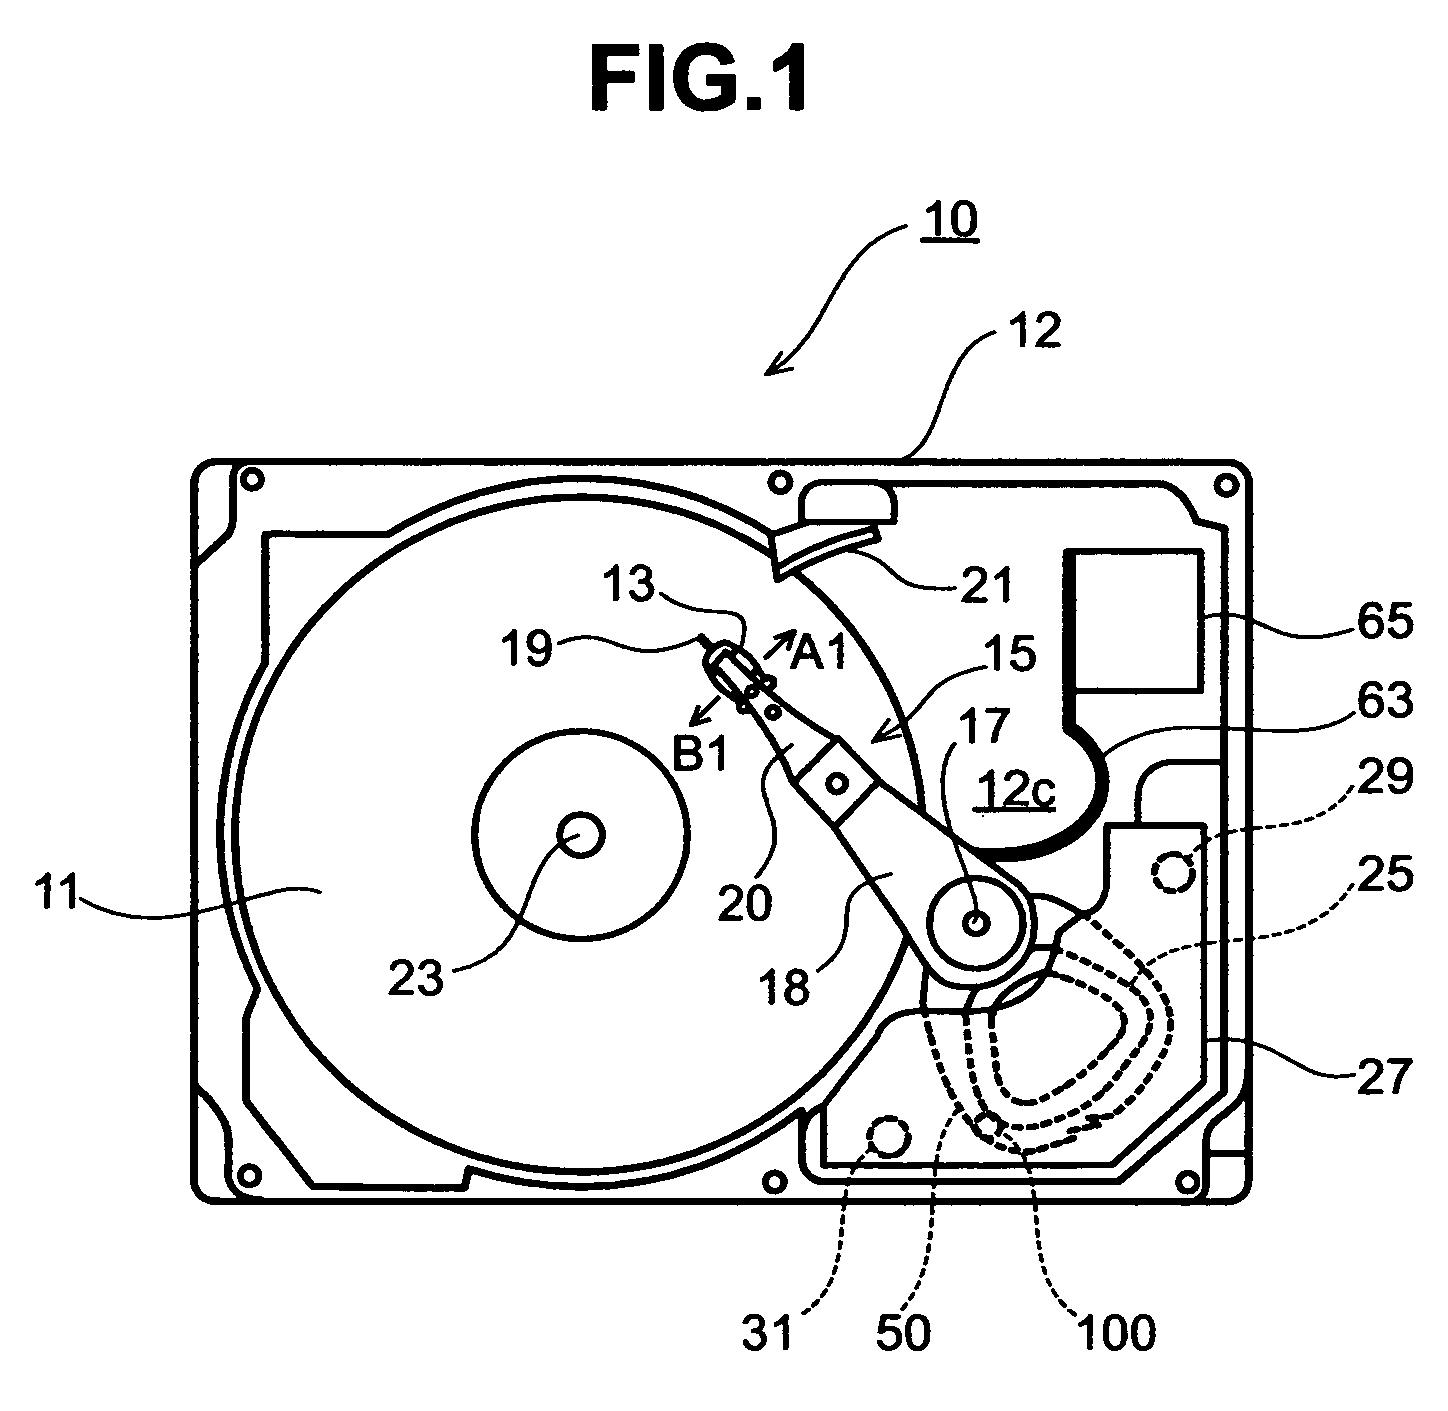 Rotating disk storage device with a retracting actuator head suspension assembly